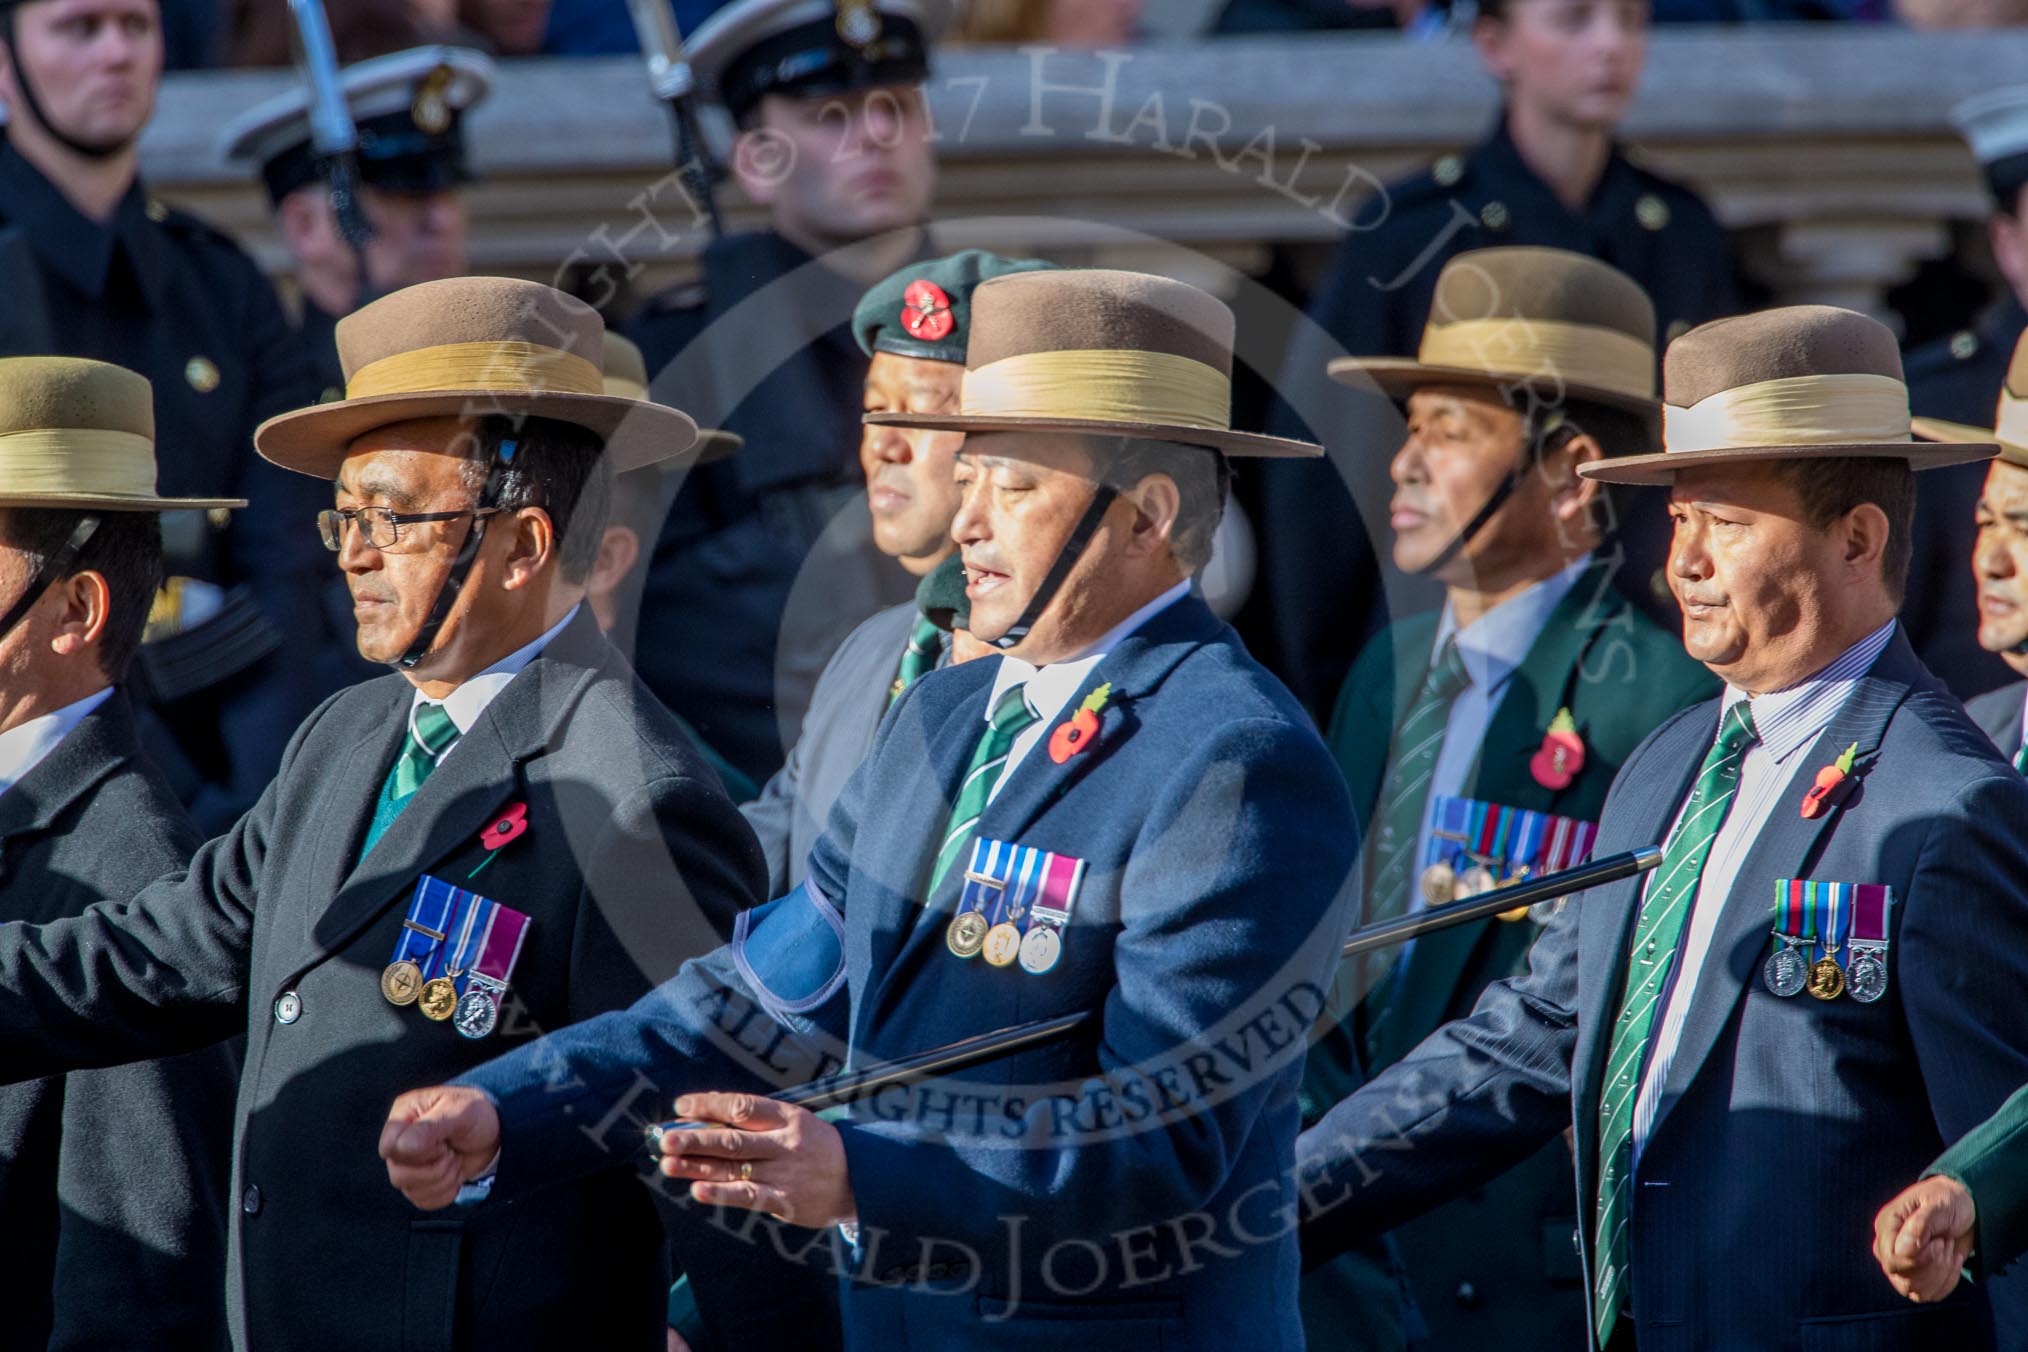 British Gurkha Welfare Society (Group D6, 5 members) during the Royal British Legion March Past on Remembrance Sunday at the Cenotaph, Whitehall, Westminster, London, 11 November 2018, 12:21.